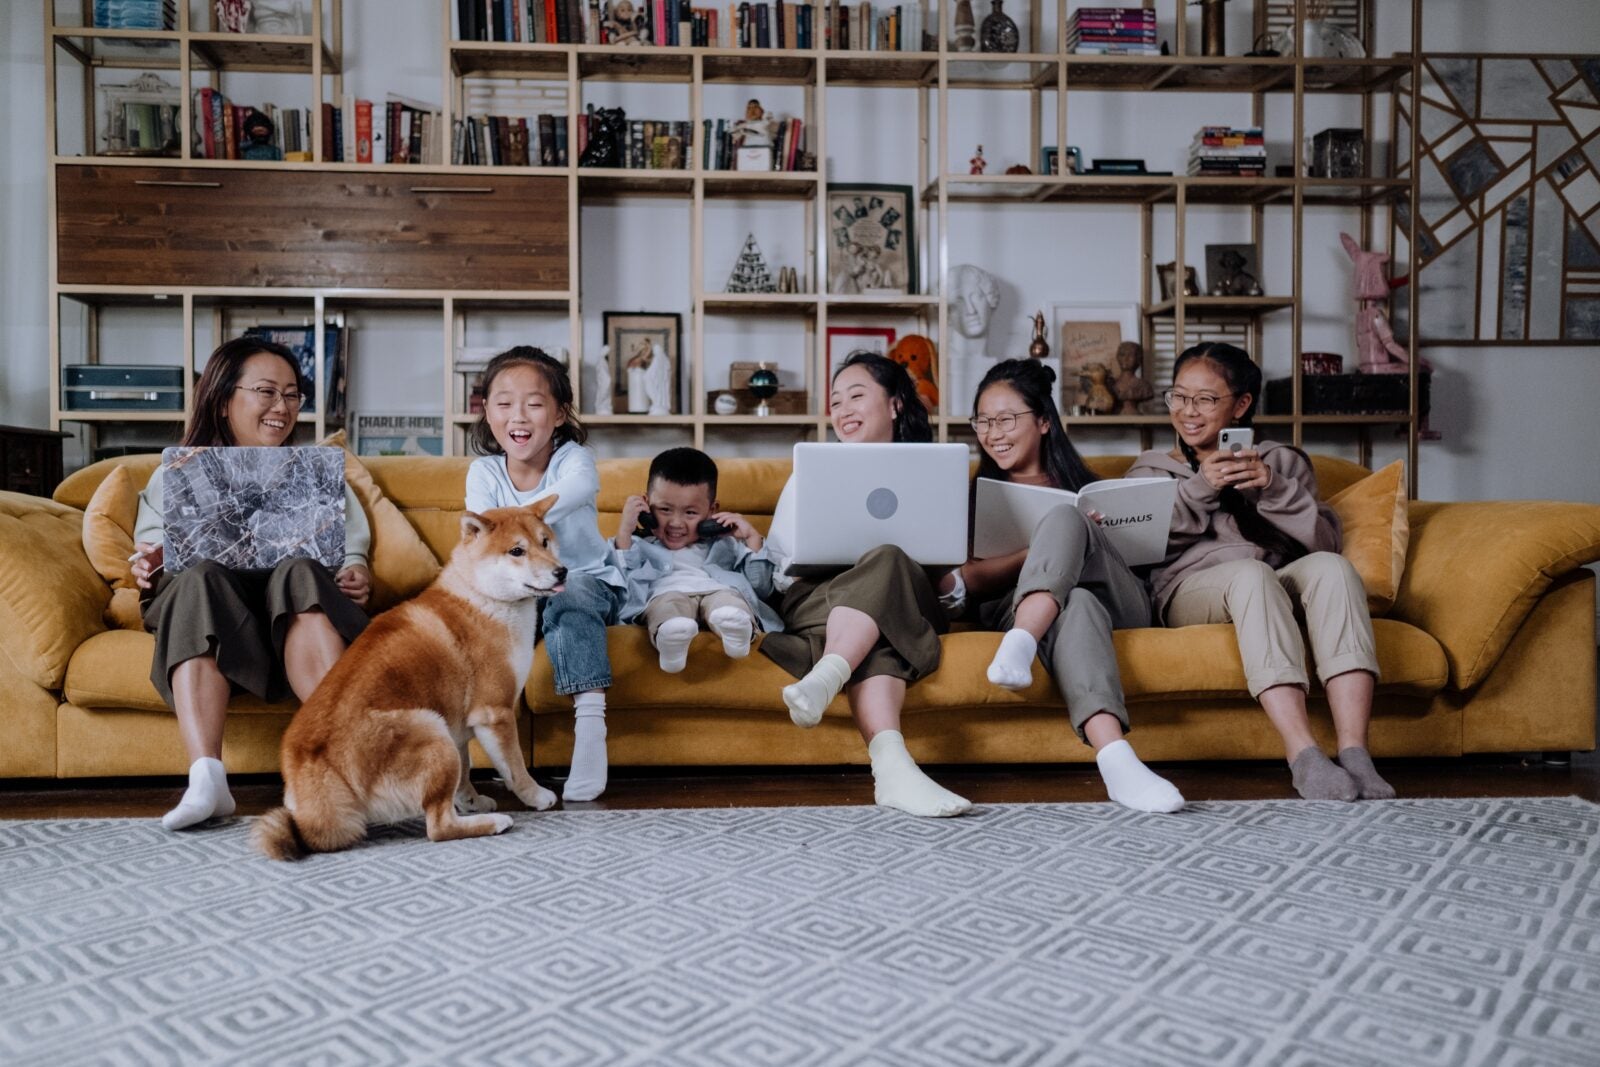 A family sits on a yellow sofa. They are laughing and enjoying each other's company while their dog sits in front of them.